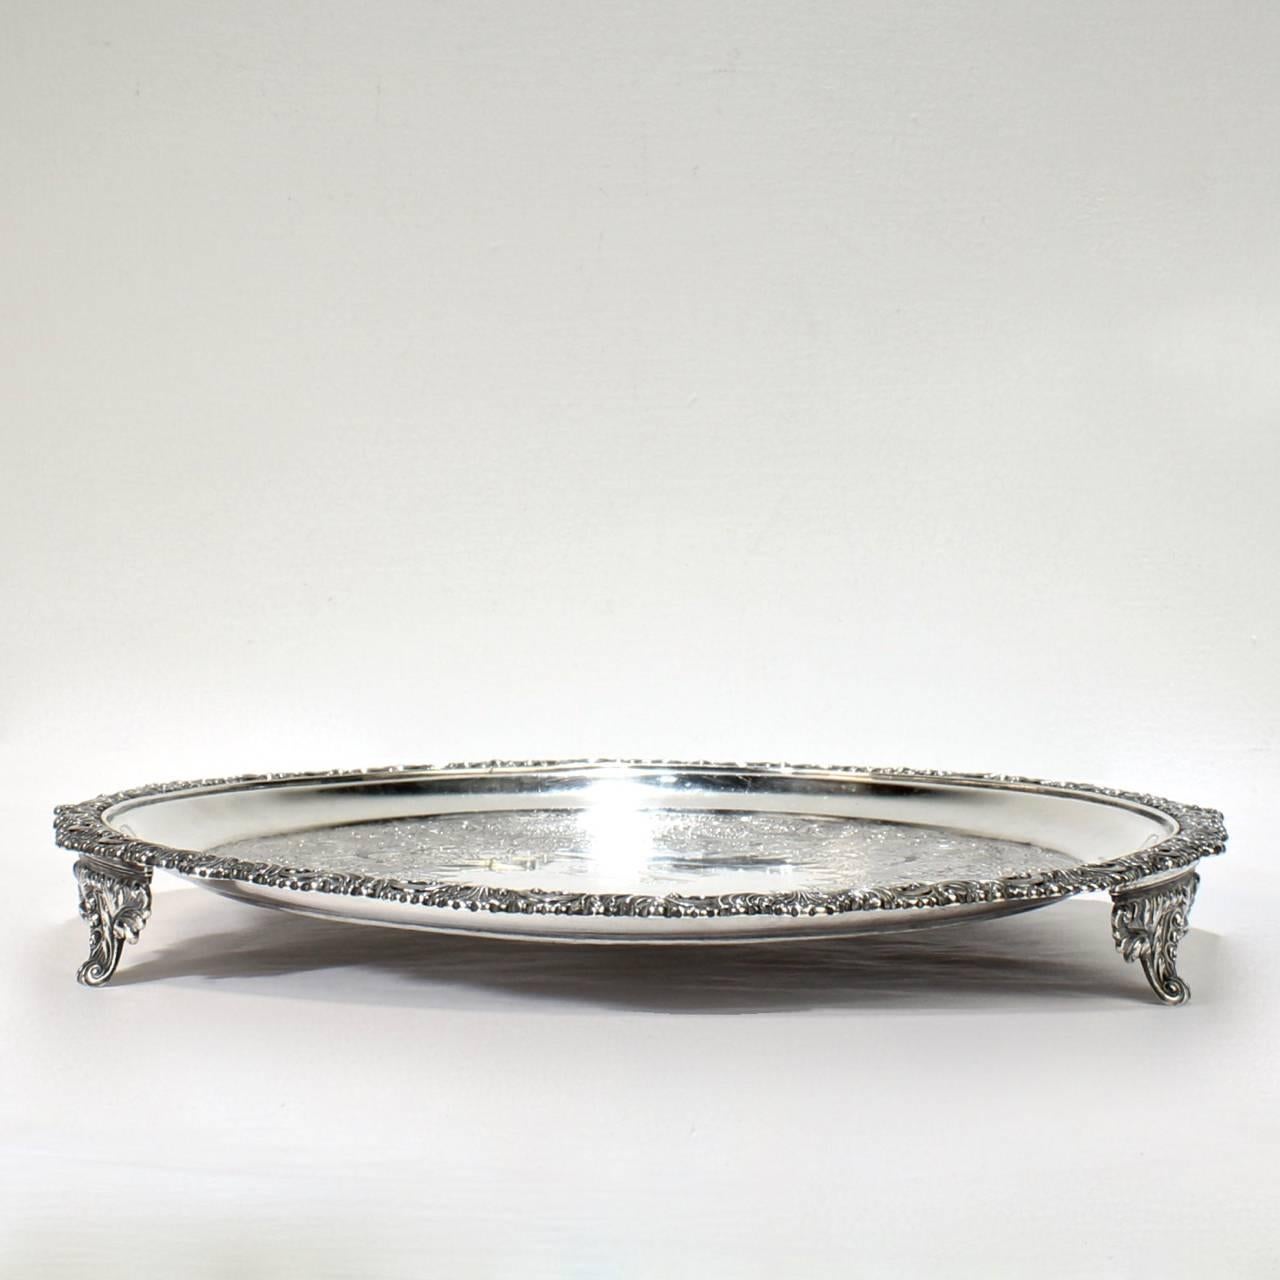 Regency Antique Crested Scottish Sterling Silver Salver or Tray by George McHattie